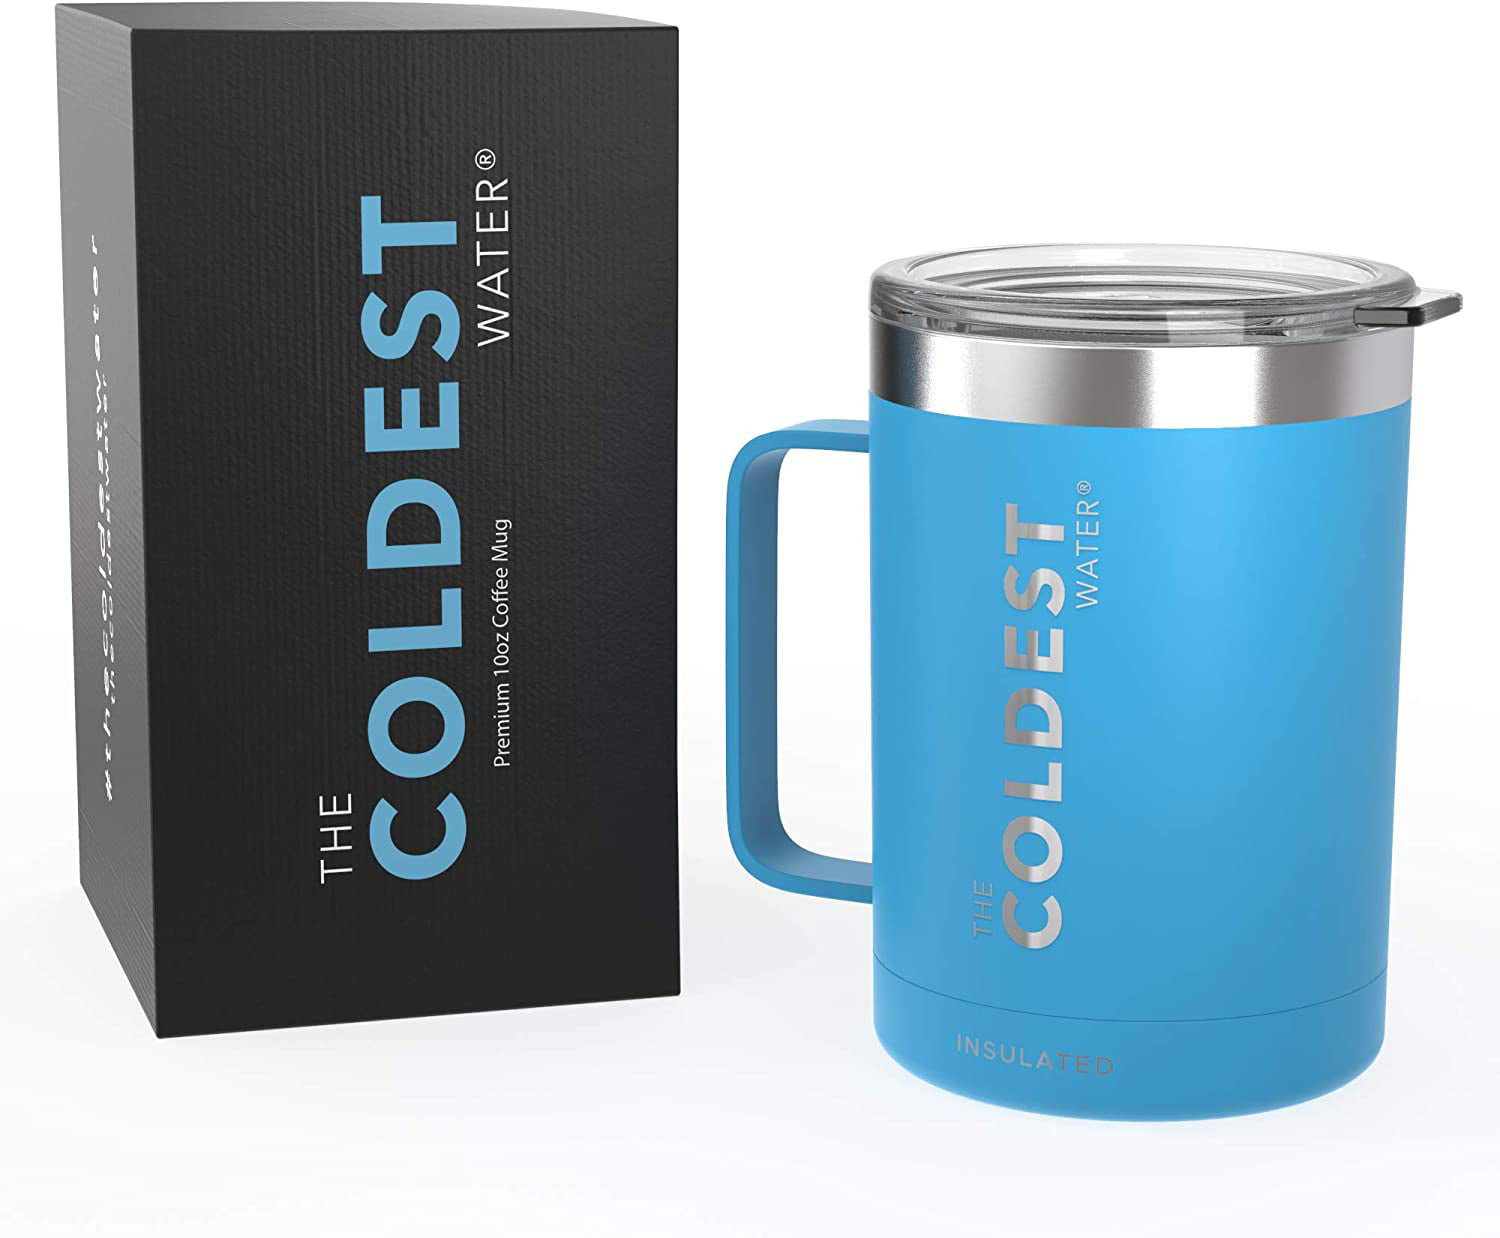 The Coldest Espresso Coffee Mug - Stainless Steel Super Insulated Travel Mug  for Hot & Cold Drinks, Best for Tea, Lattes, Cappuccino Coffee Cup(Forever  Pink, 4 Oz) 